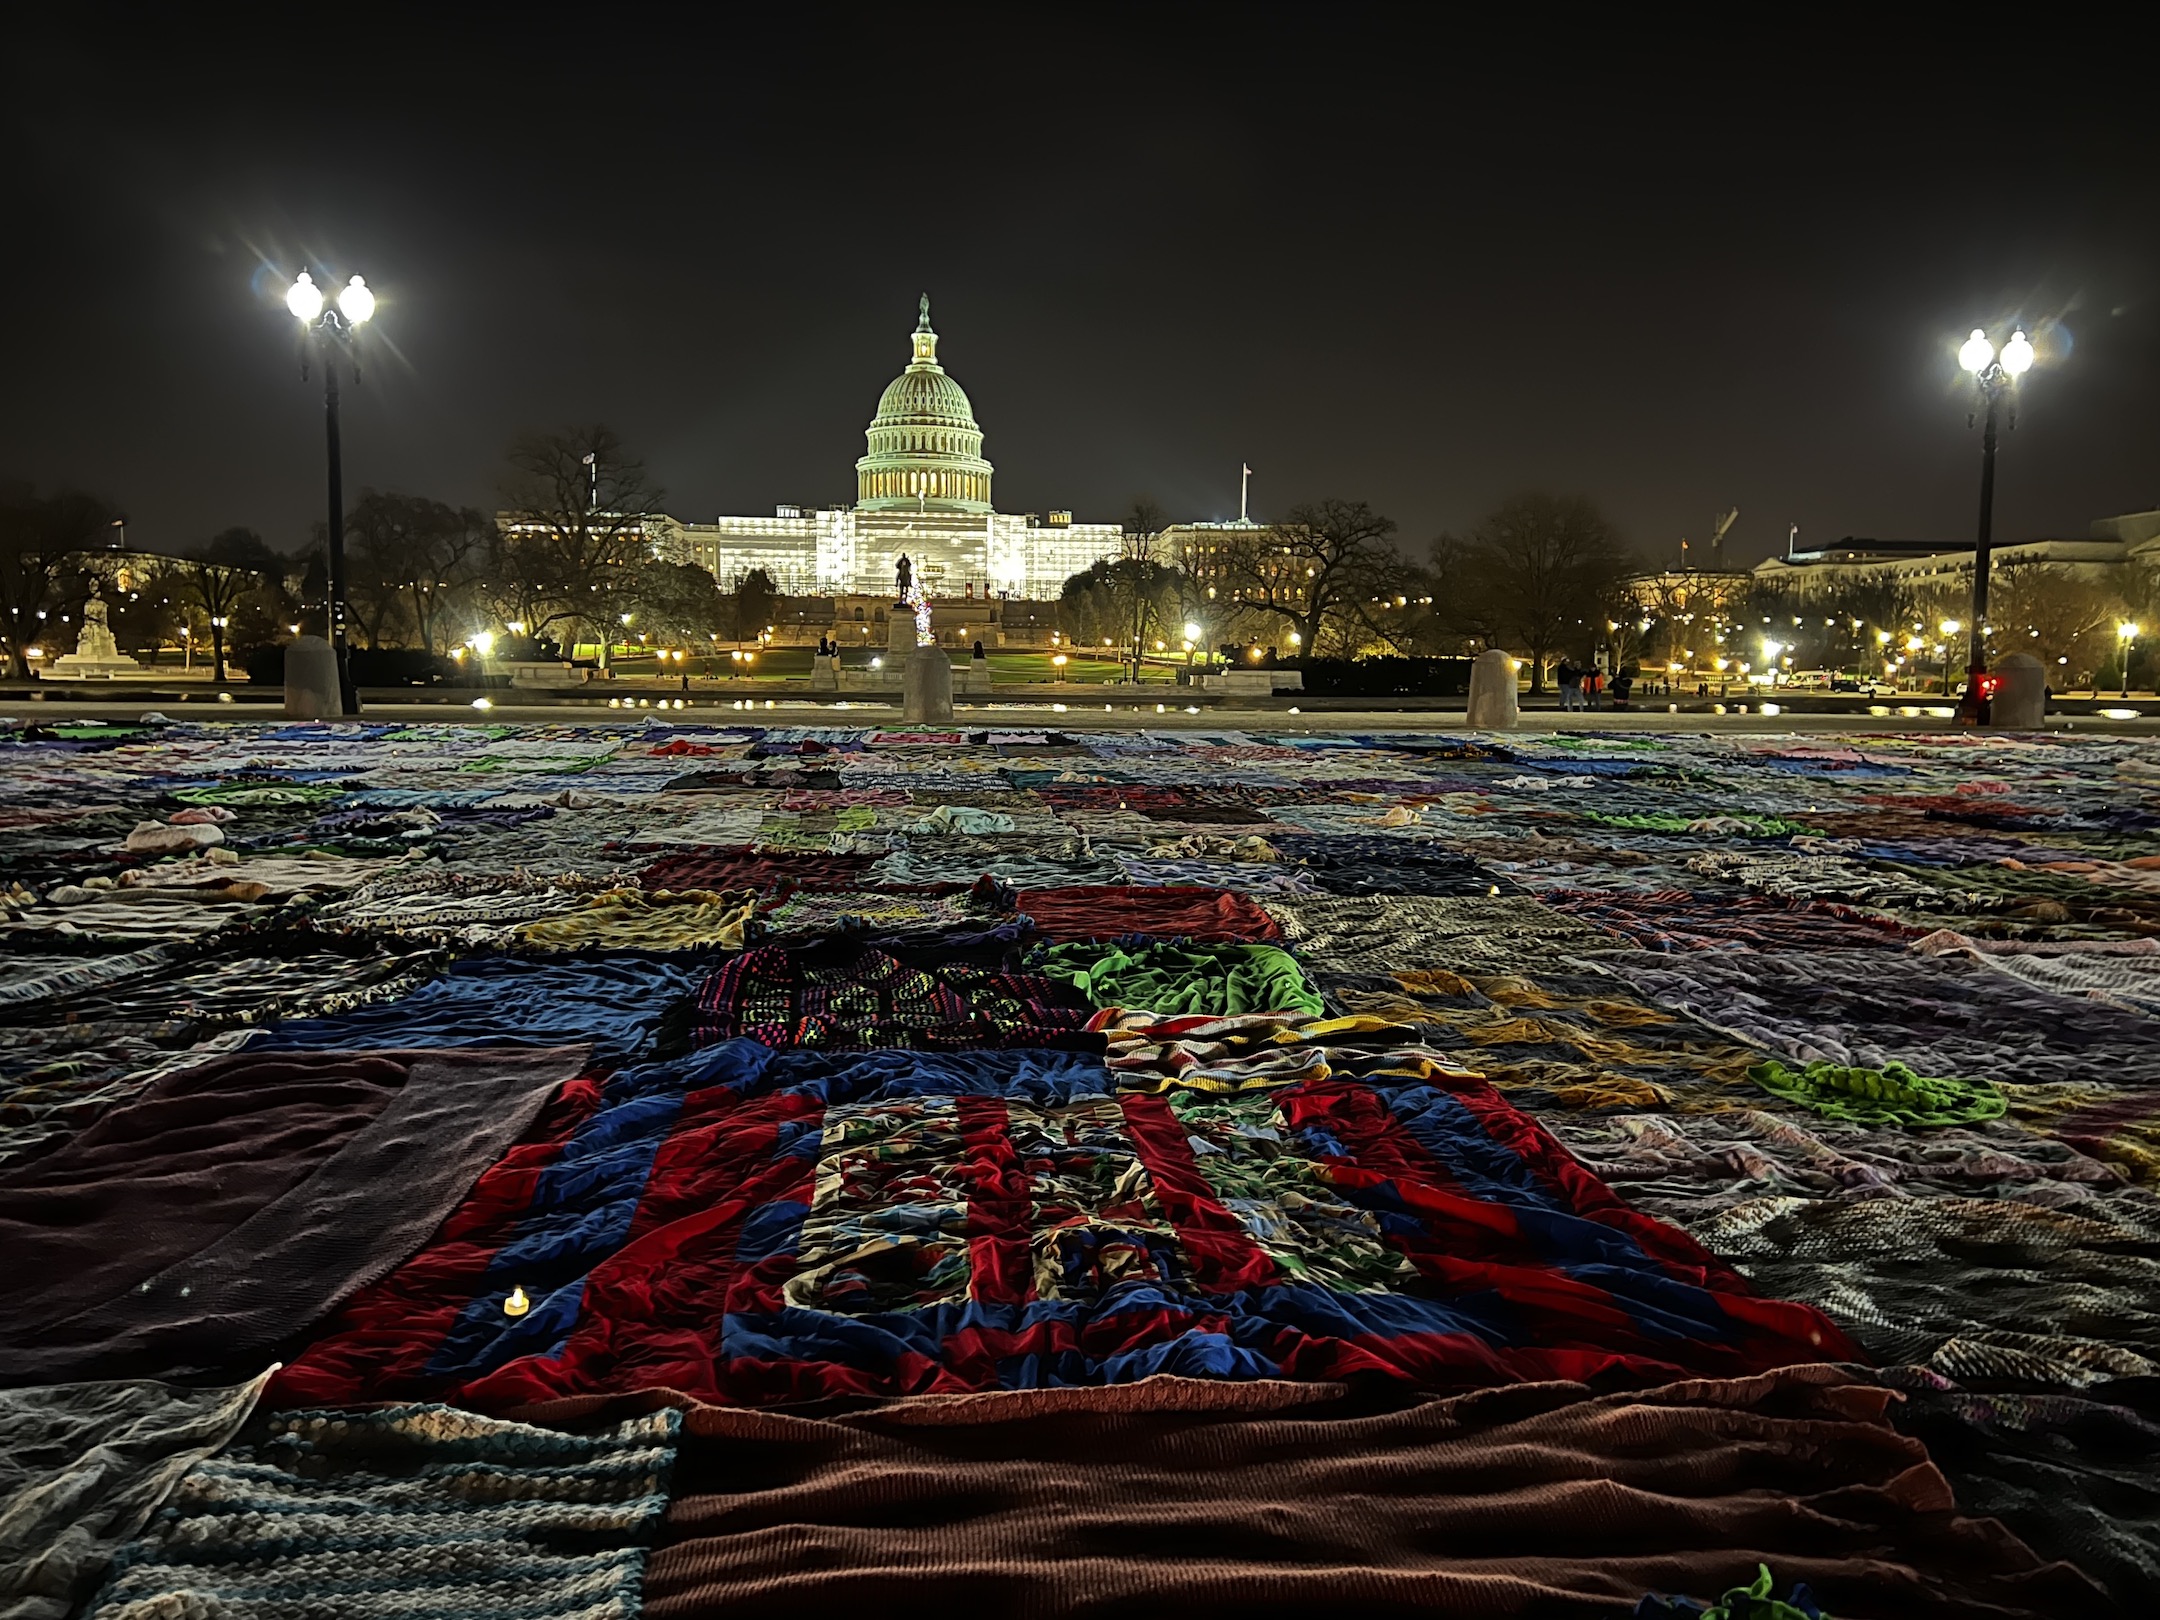 DC Blankets in front of US Capitol